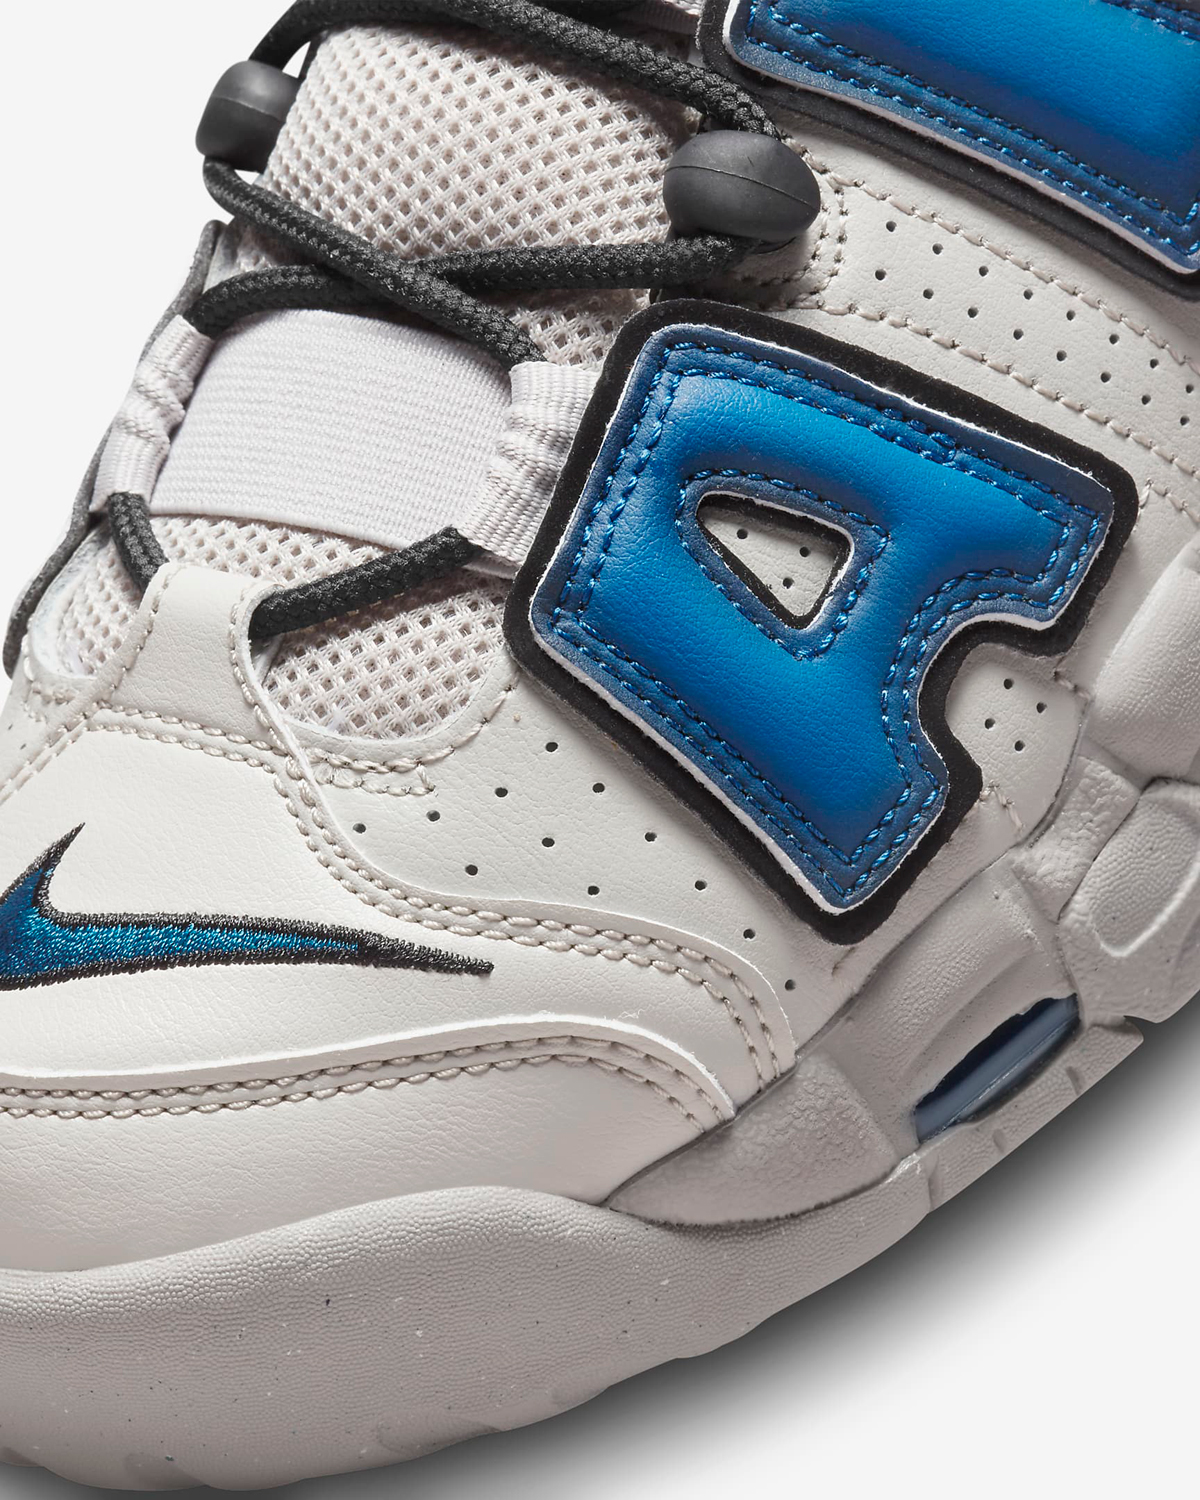 Nike-Air-More-Uptempo-96-Industrial-Blue-7